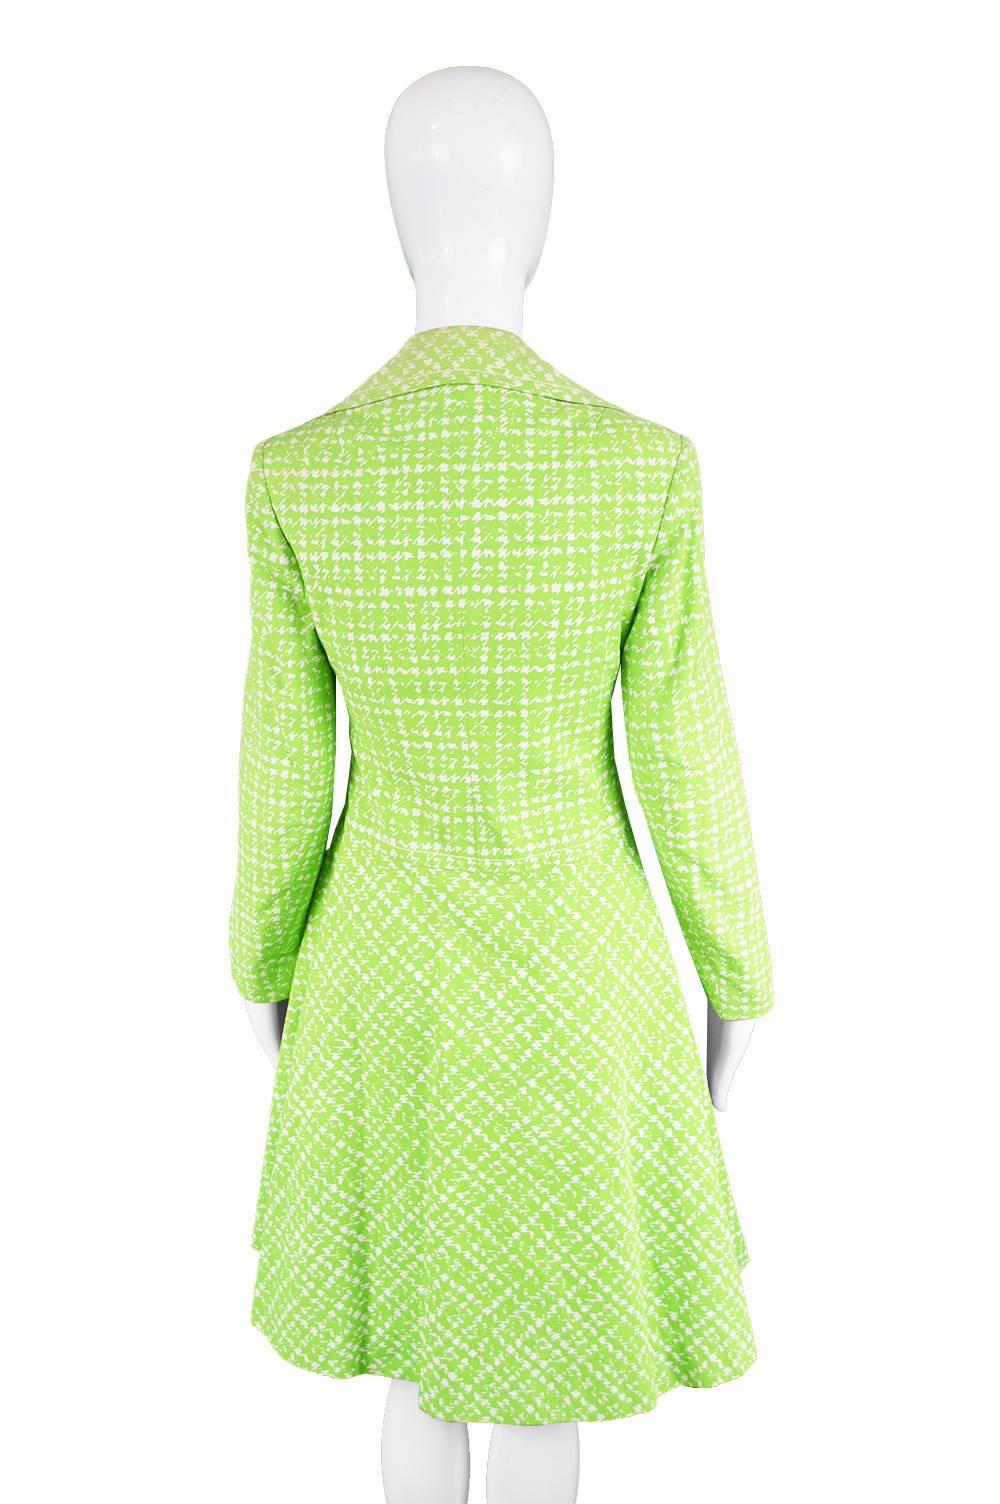 Diorling by Christian Dior London Vintage Green & White Cotton Mod Coat, 1960s 2